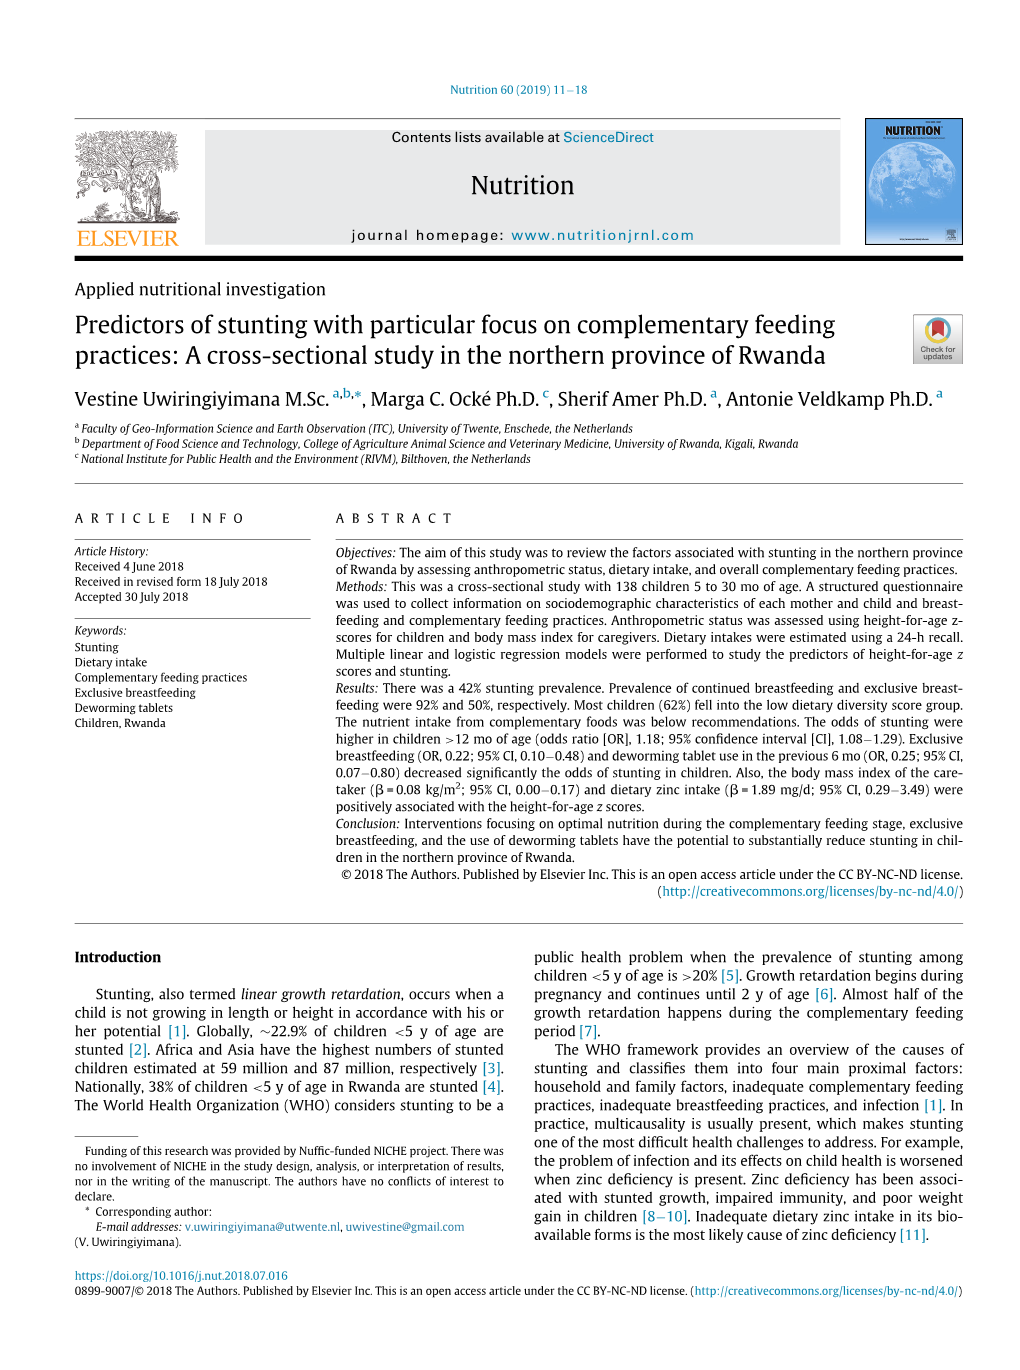 Predictors of Stunting with Particular Focus on Complementary Feeding Practices: a Cross-Sectional Study in the Northern Province of Rwanda